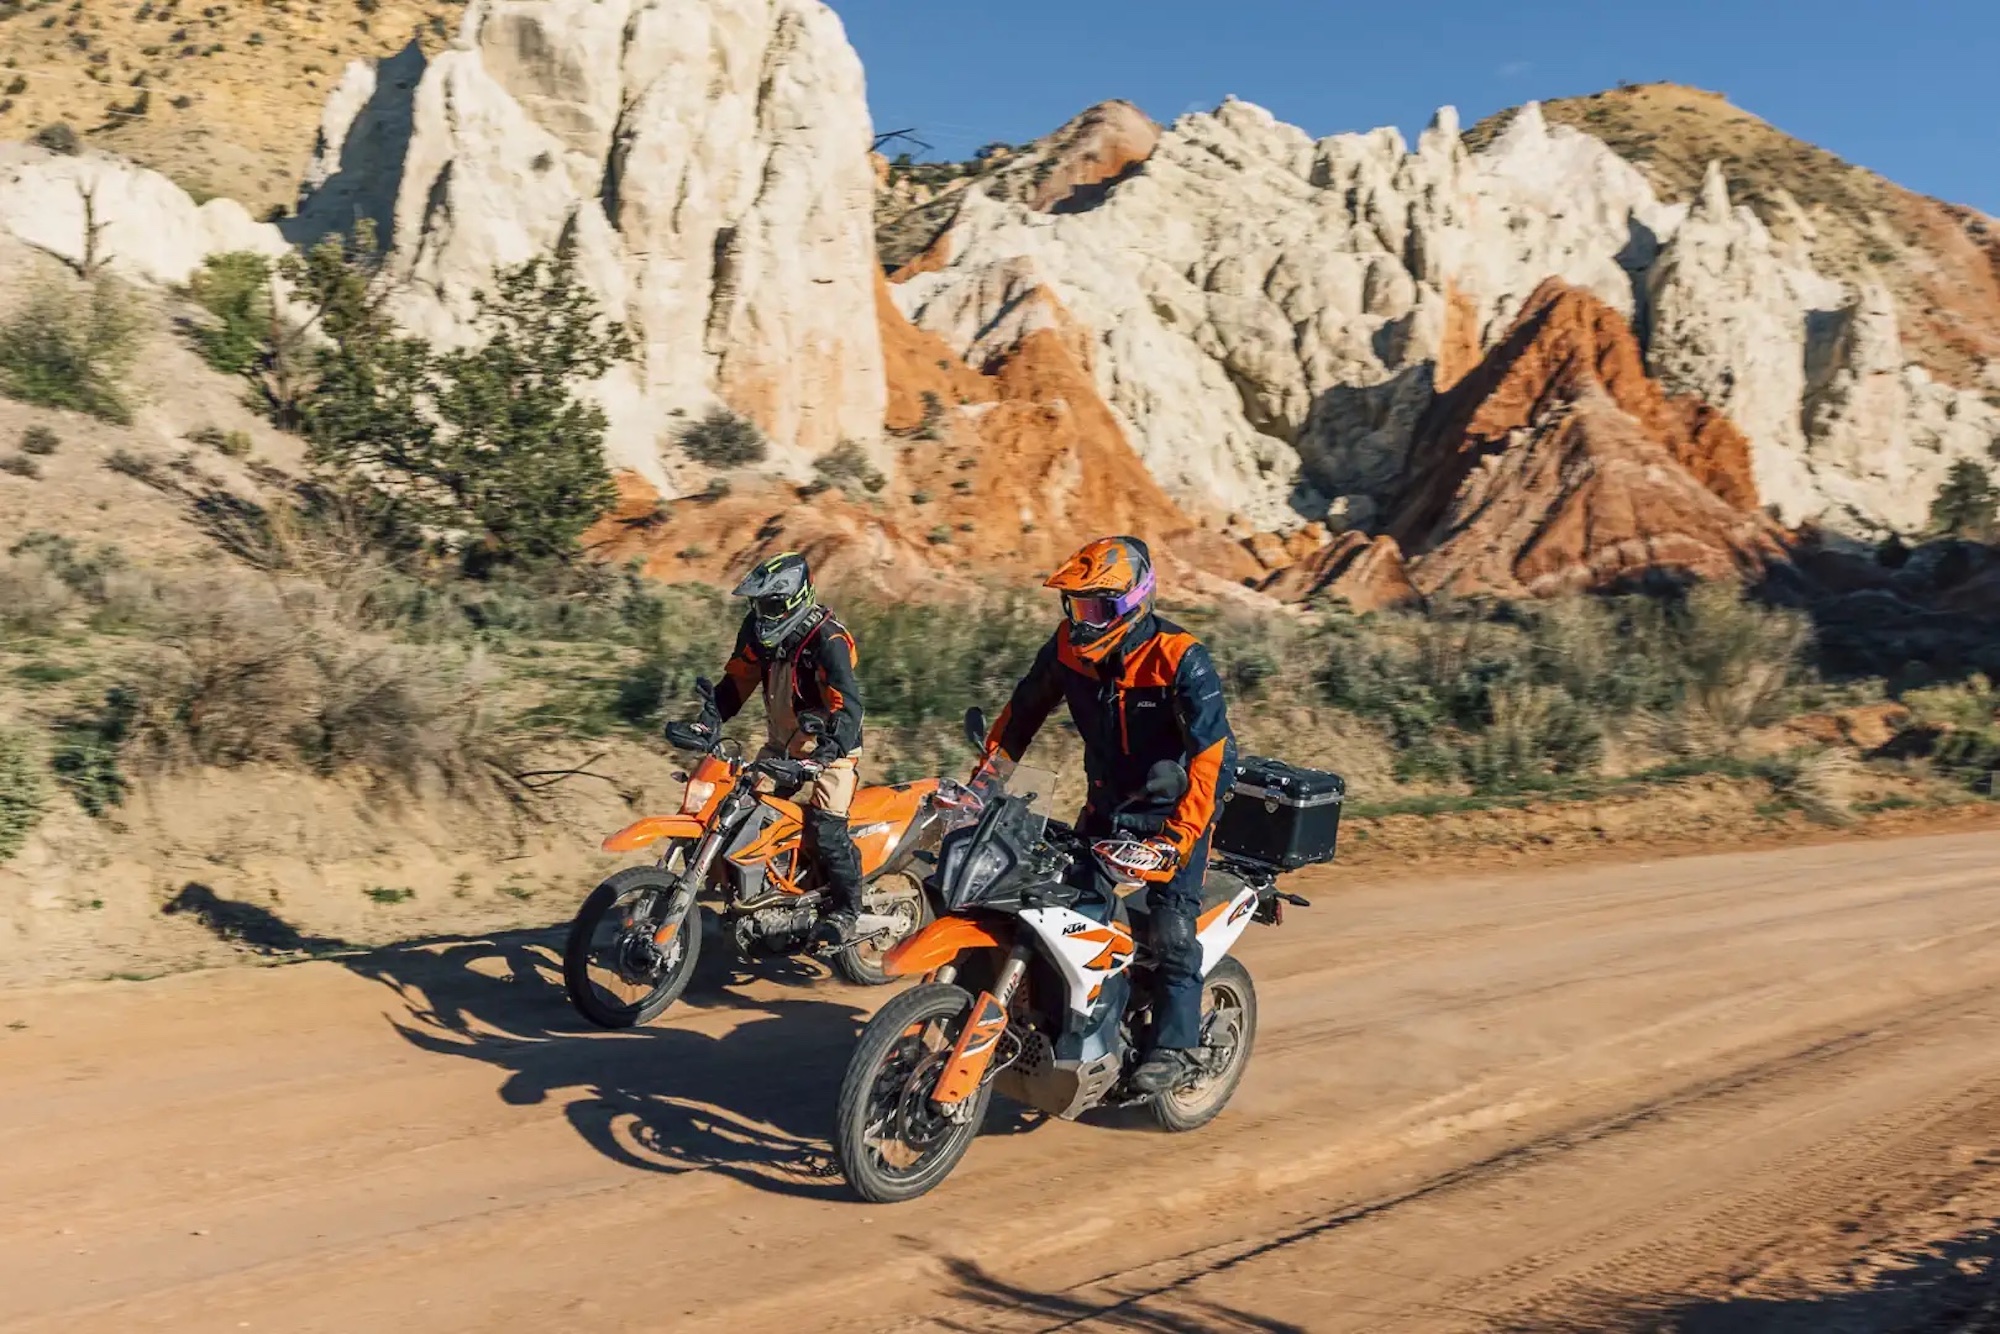 A view of KTM machines munching the miles in the spirit of ravishing routes, sexy scenery, and memories by the boatload. Media sourced from Ultimate Motorcycling.